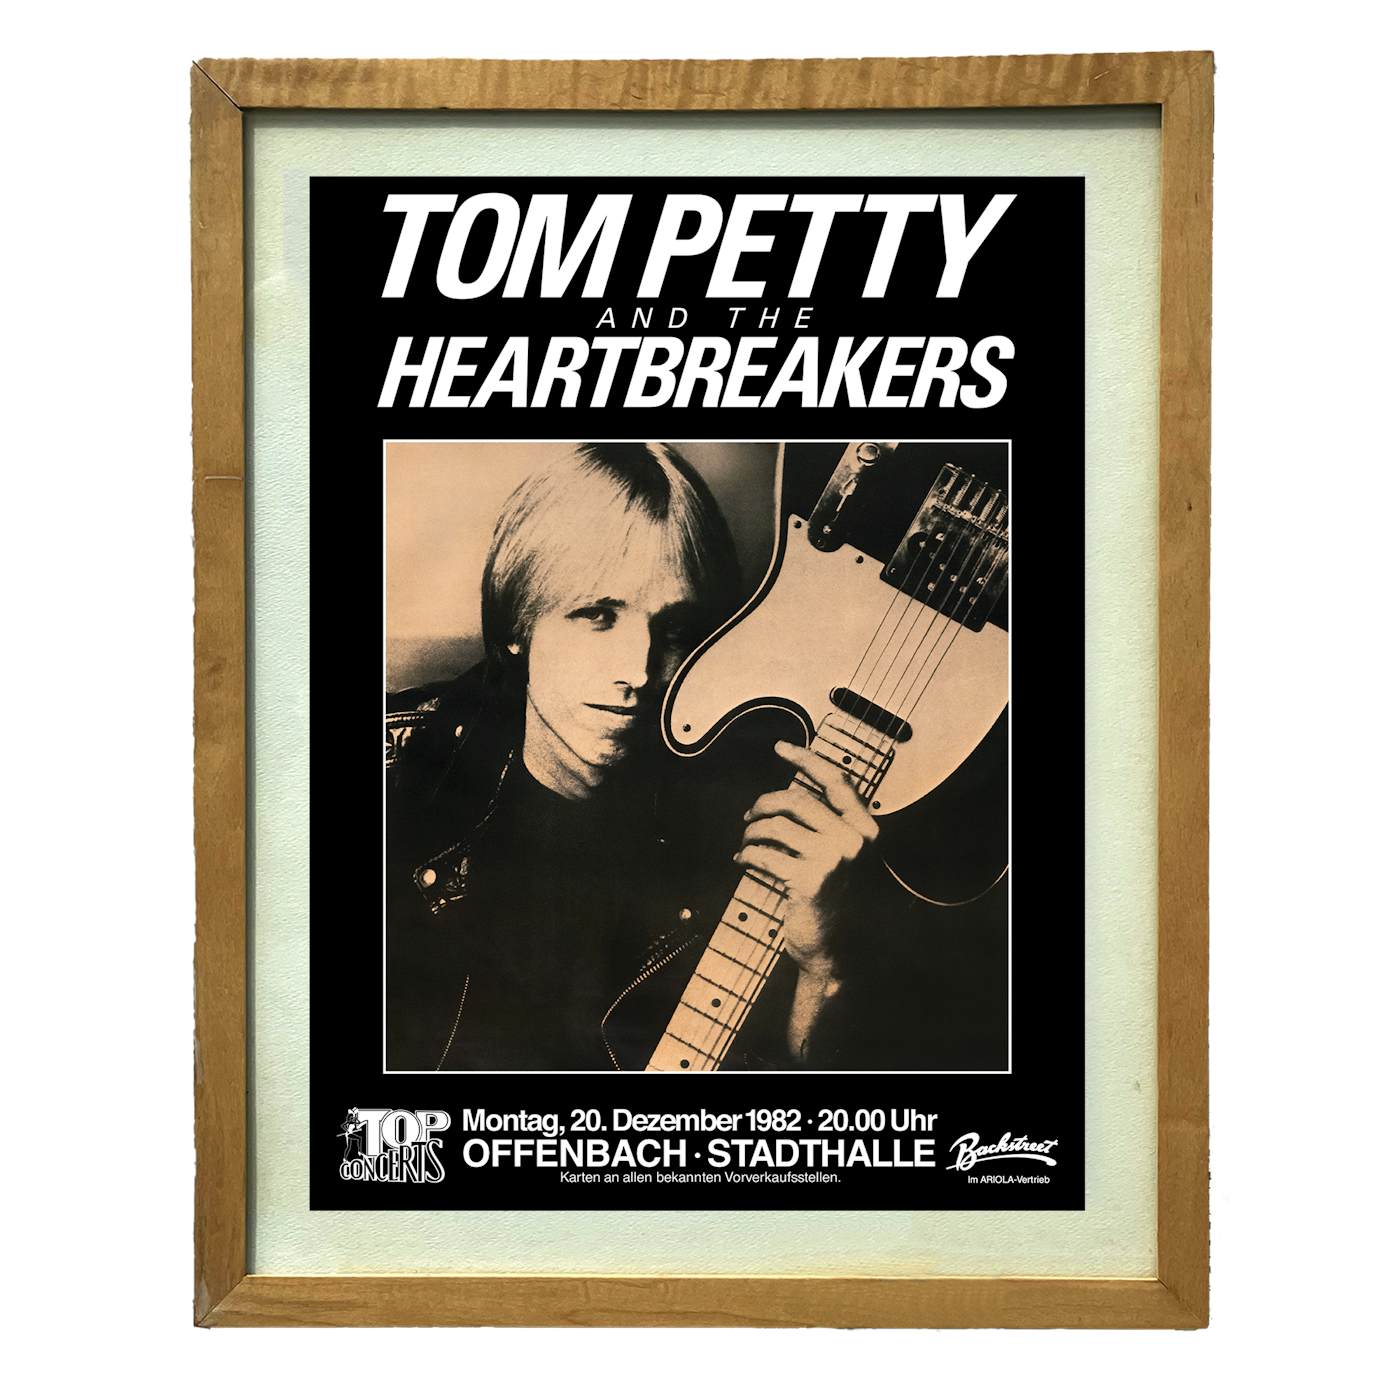 Tom Petty and the Heartbreakers 1982 Offenbach Show Poster